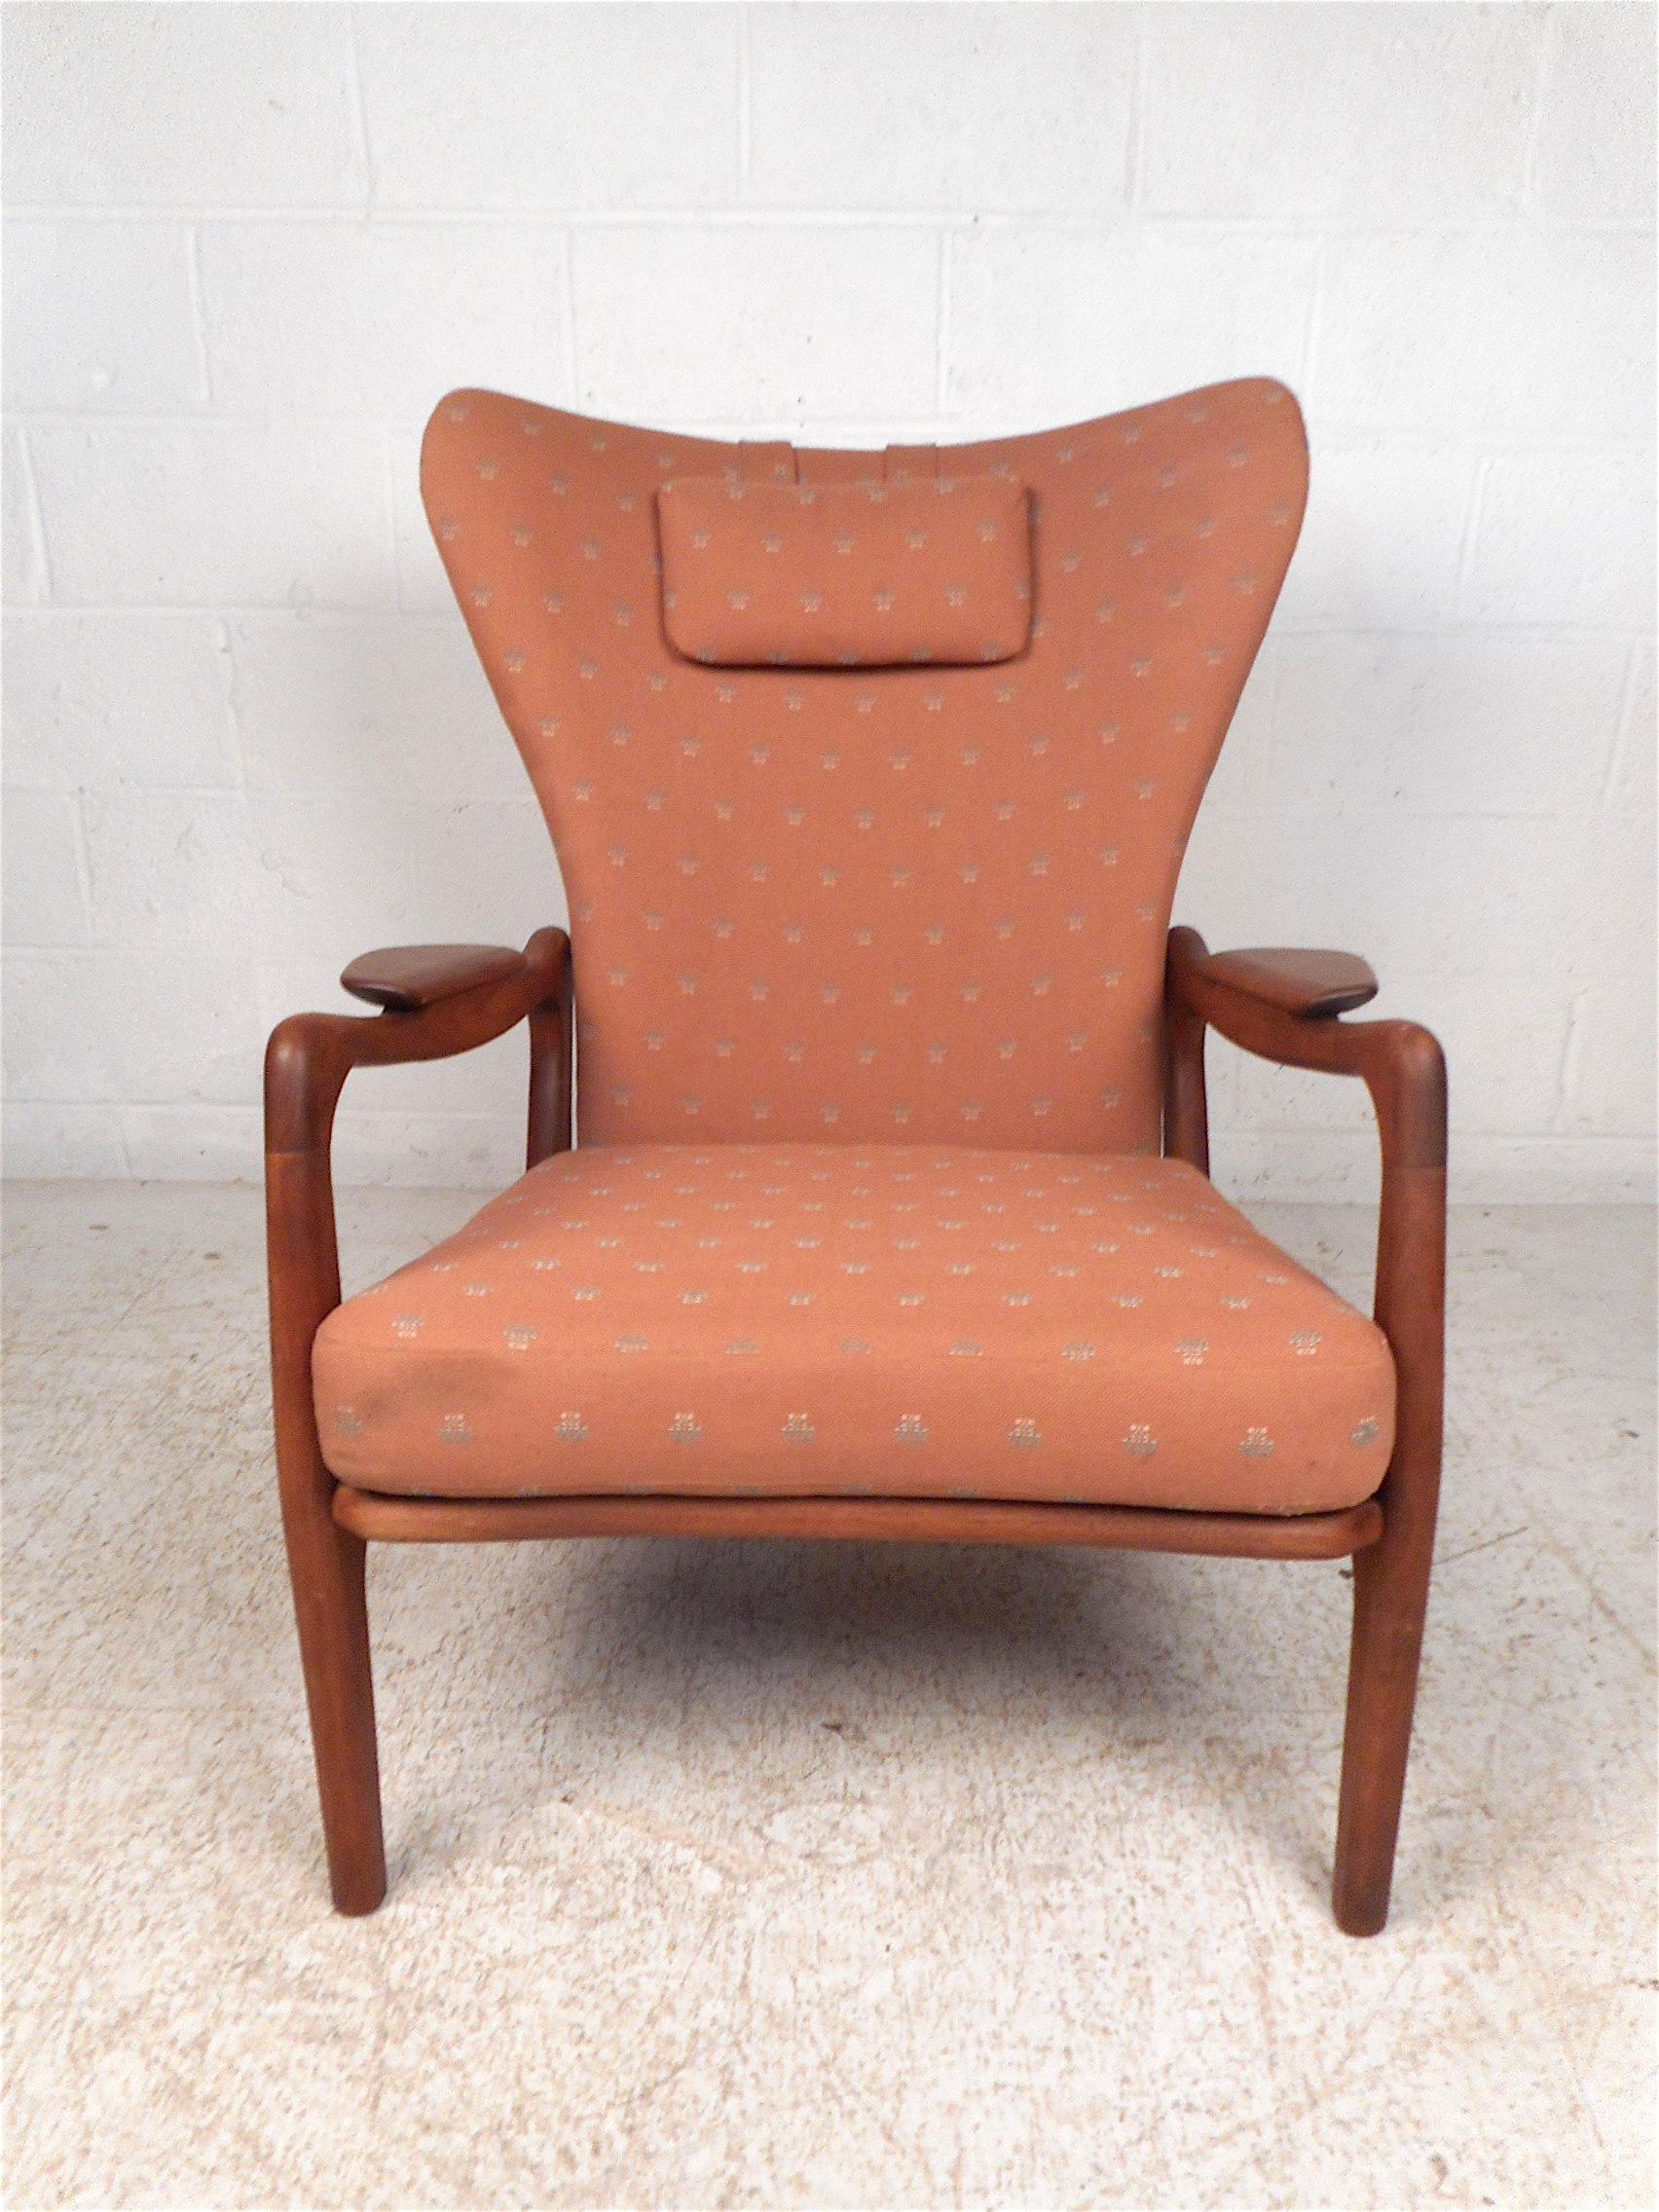 Impressive wingback chair designed by Adrian Pearsall. Tall backrests and deep seating covered in vintage salmon-colored upholstery. Sturdy walnut frame with sculpted armrests, circa 1960s. A stylish and comfy addition to any modern interior. Please